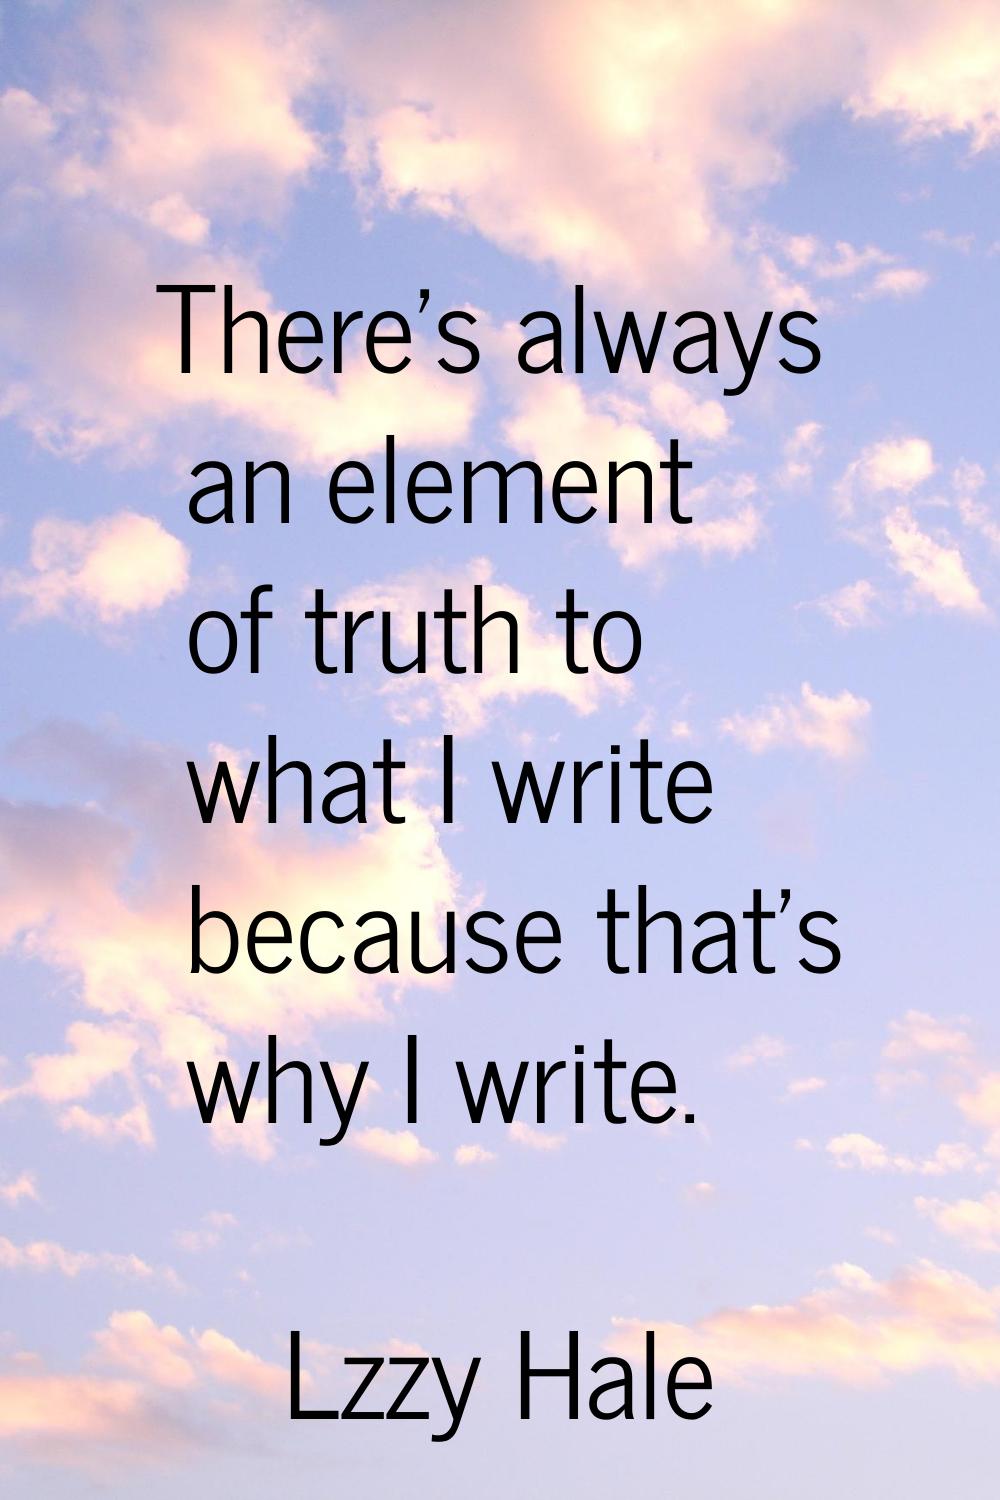 There's always an element of truth to what I write because that's why I write.